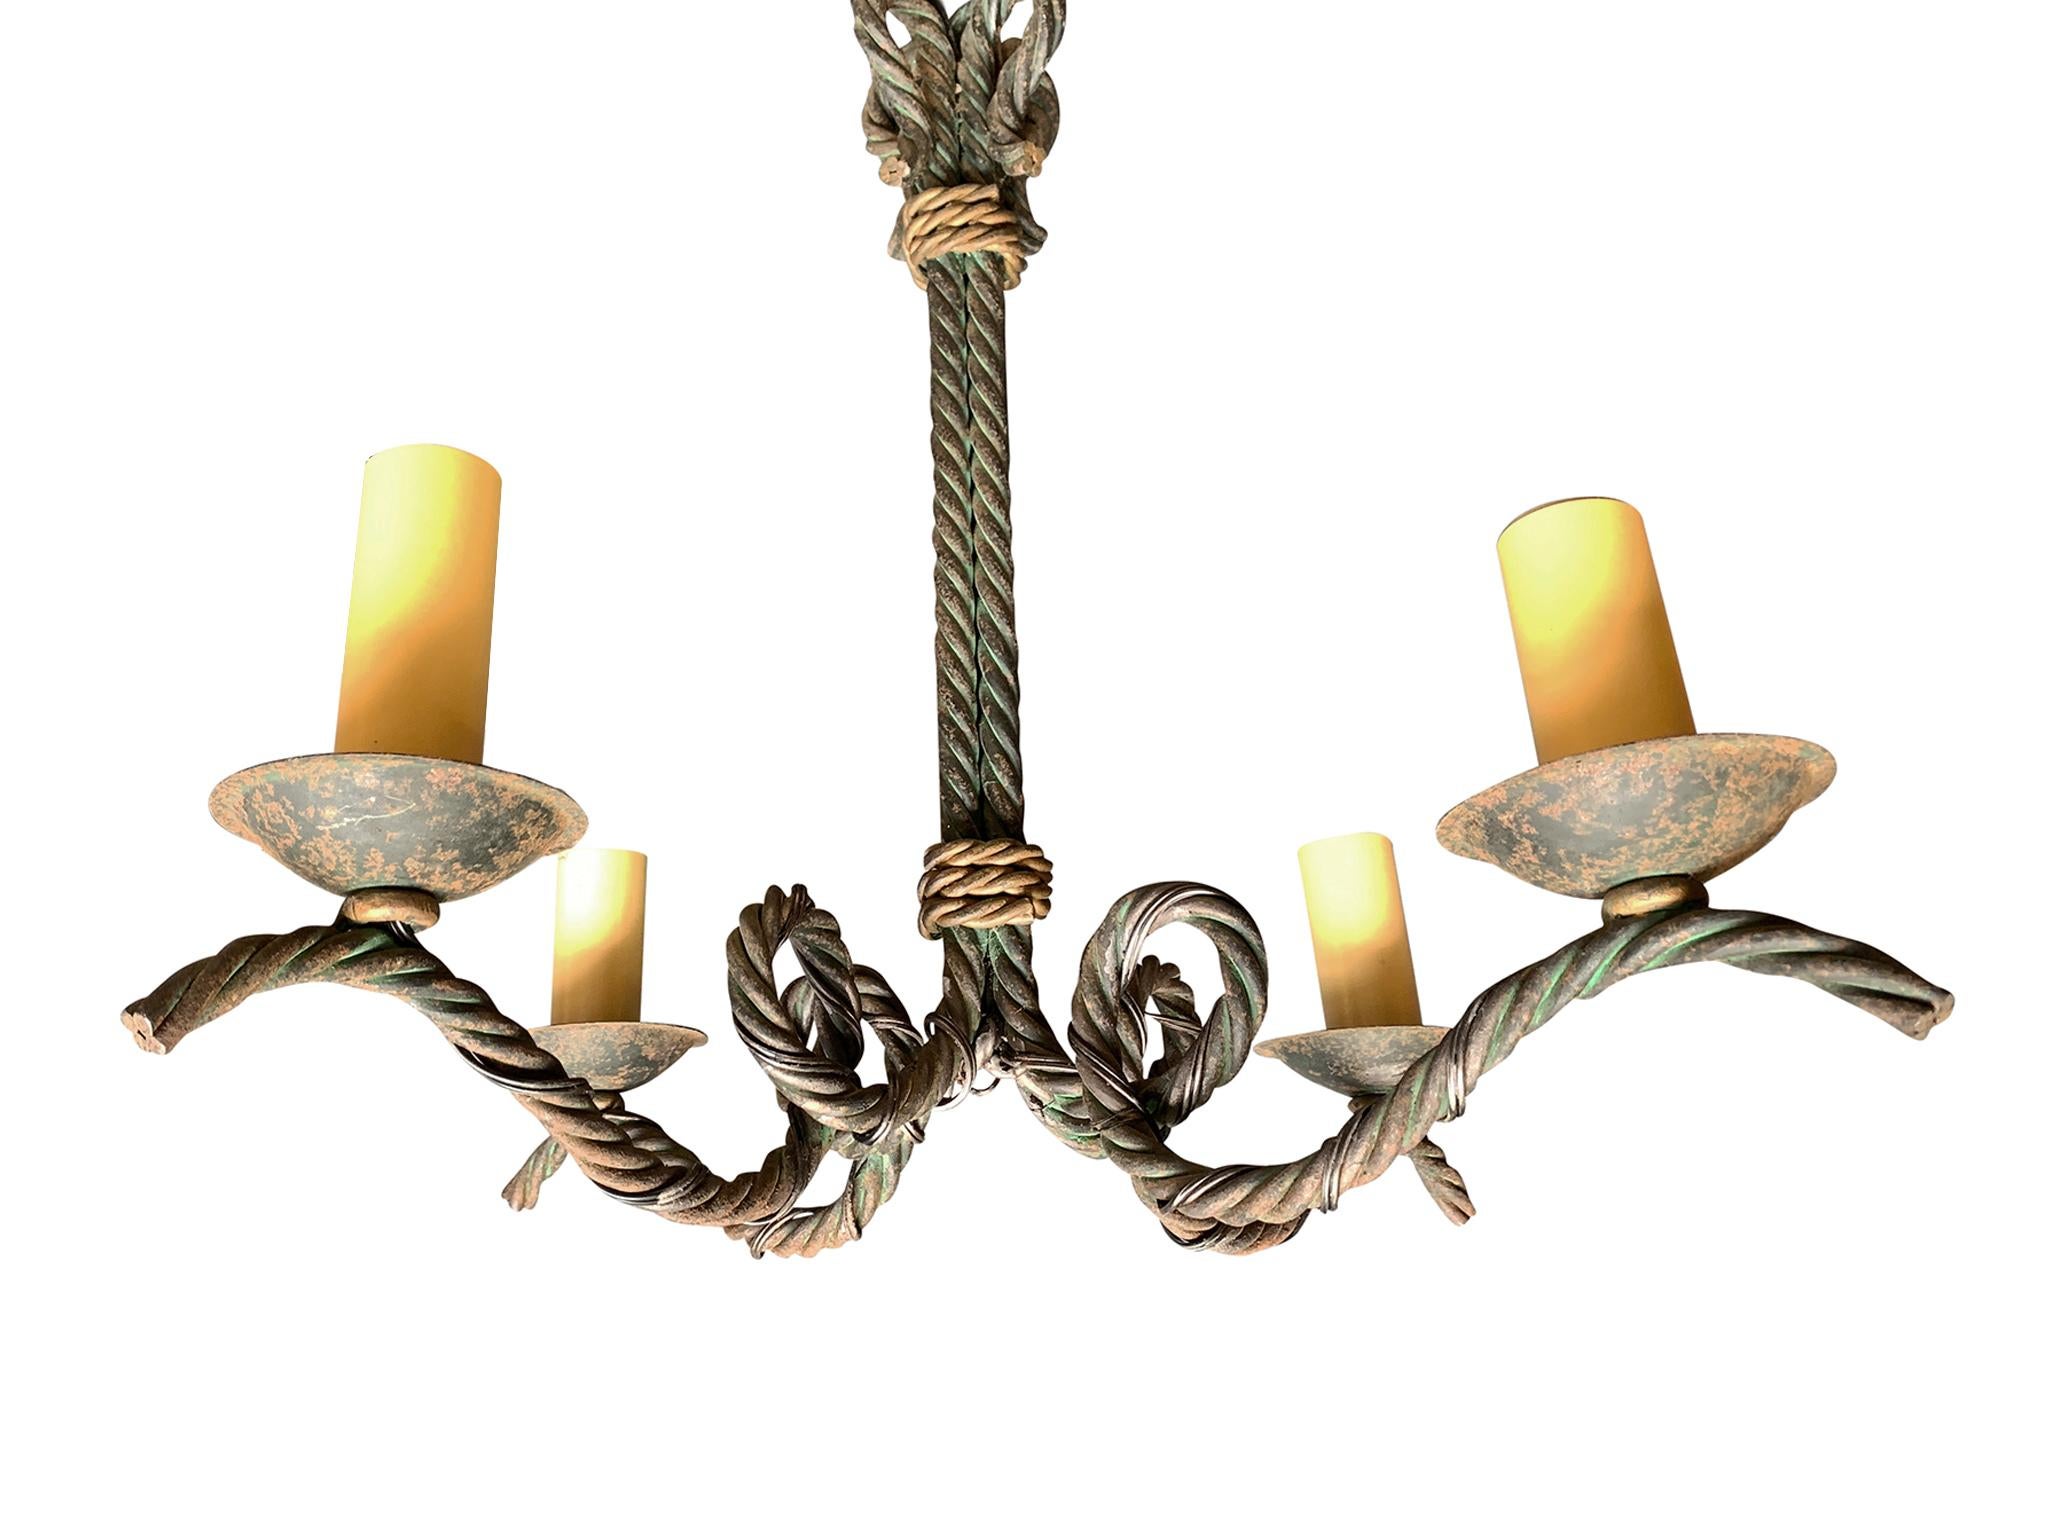 This 1930s French chandelier has an elegant twist rope design constructed with wrought iron. It has 4 candelabra arms, each culminating with a single bulb socket. The chandelier has been rewired and has new candle-style socket